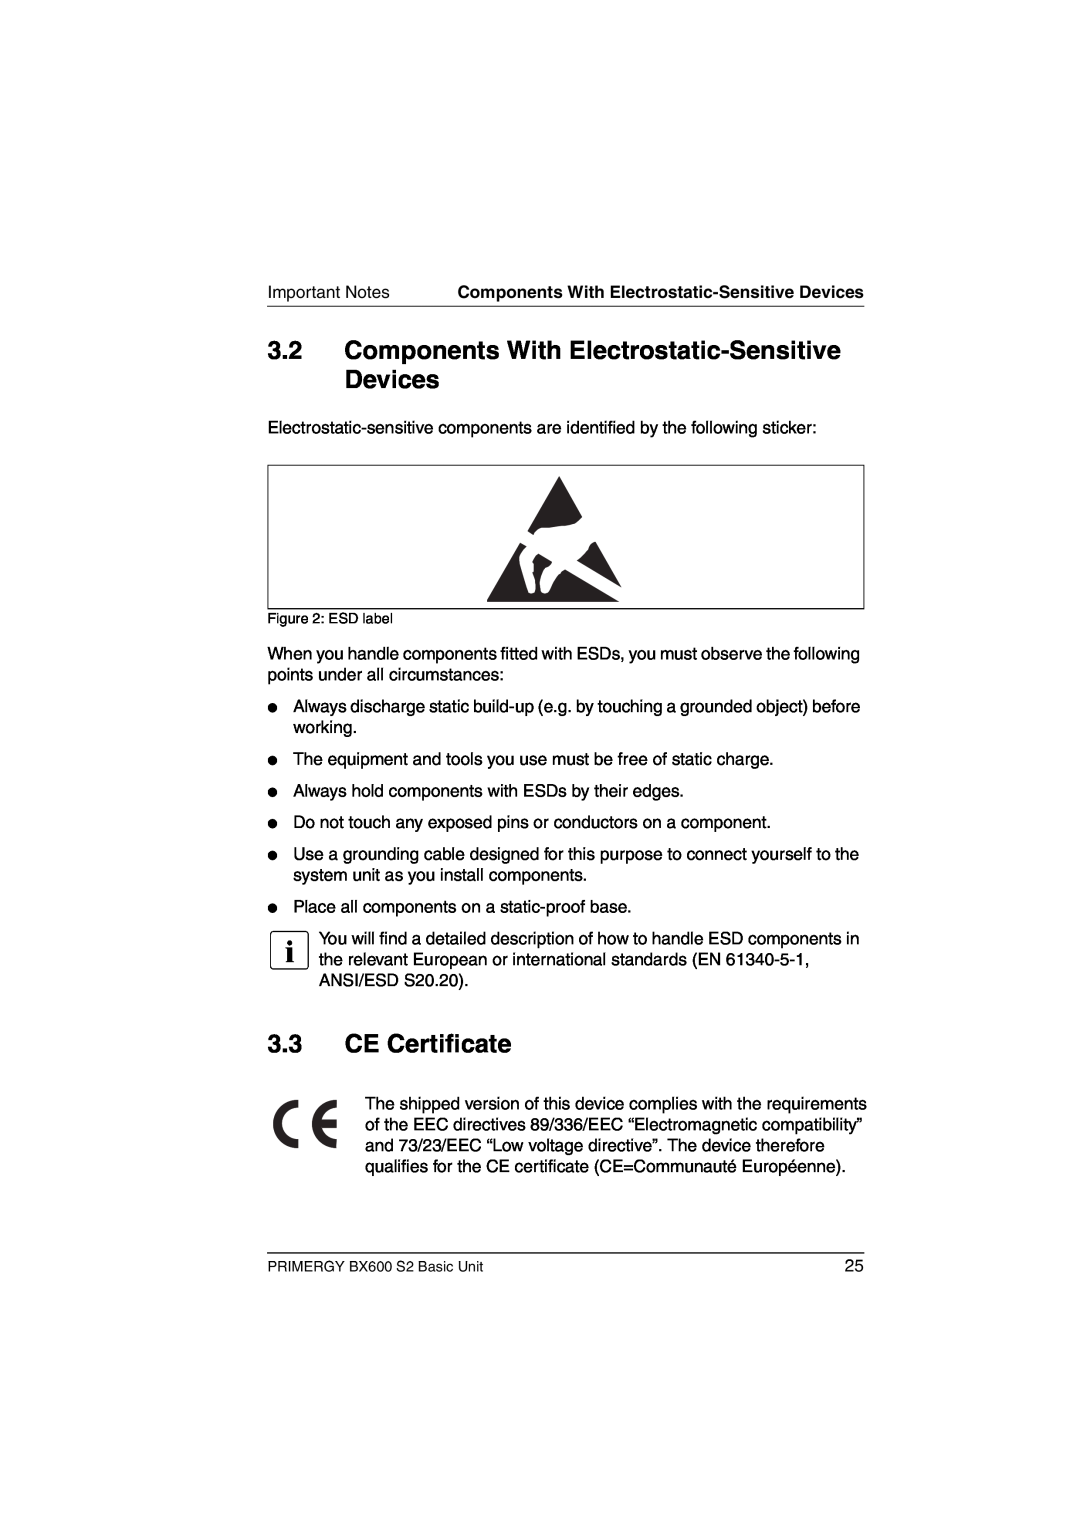 Fujitsu BX600 S2 manual Components With Electrostatic-Sensitive Devices, CE Certificate, Important Notes 